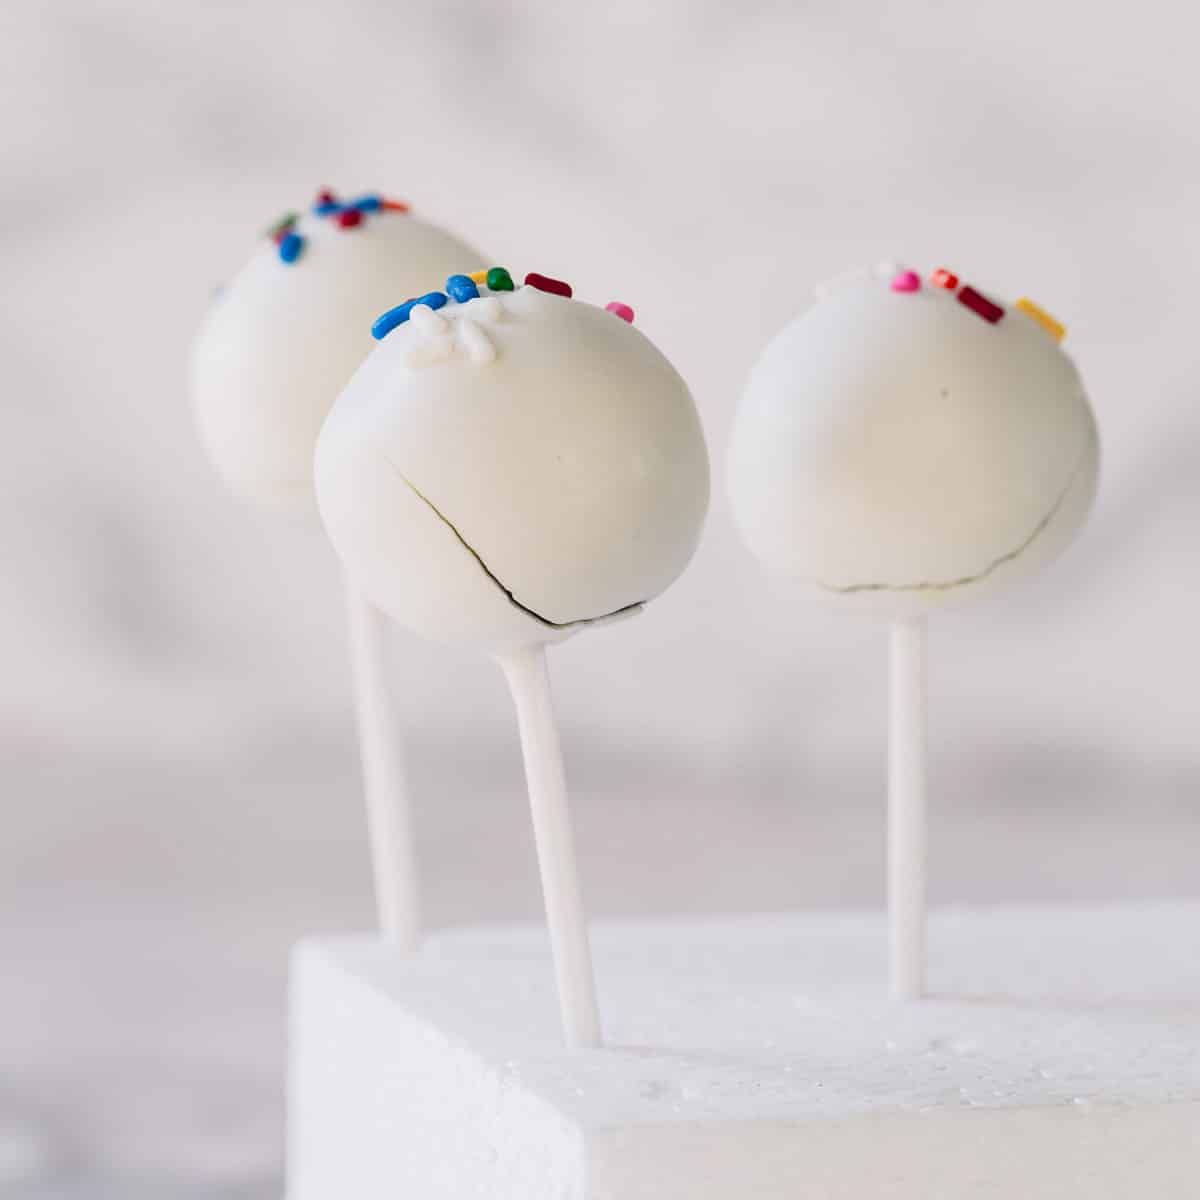 cake pops with cracked coating.